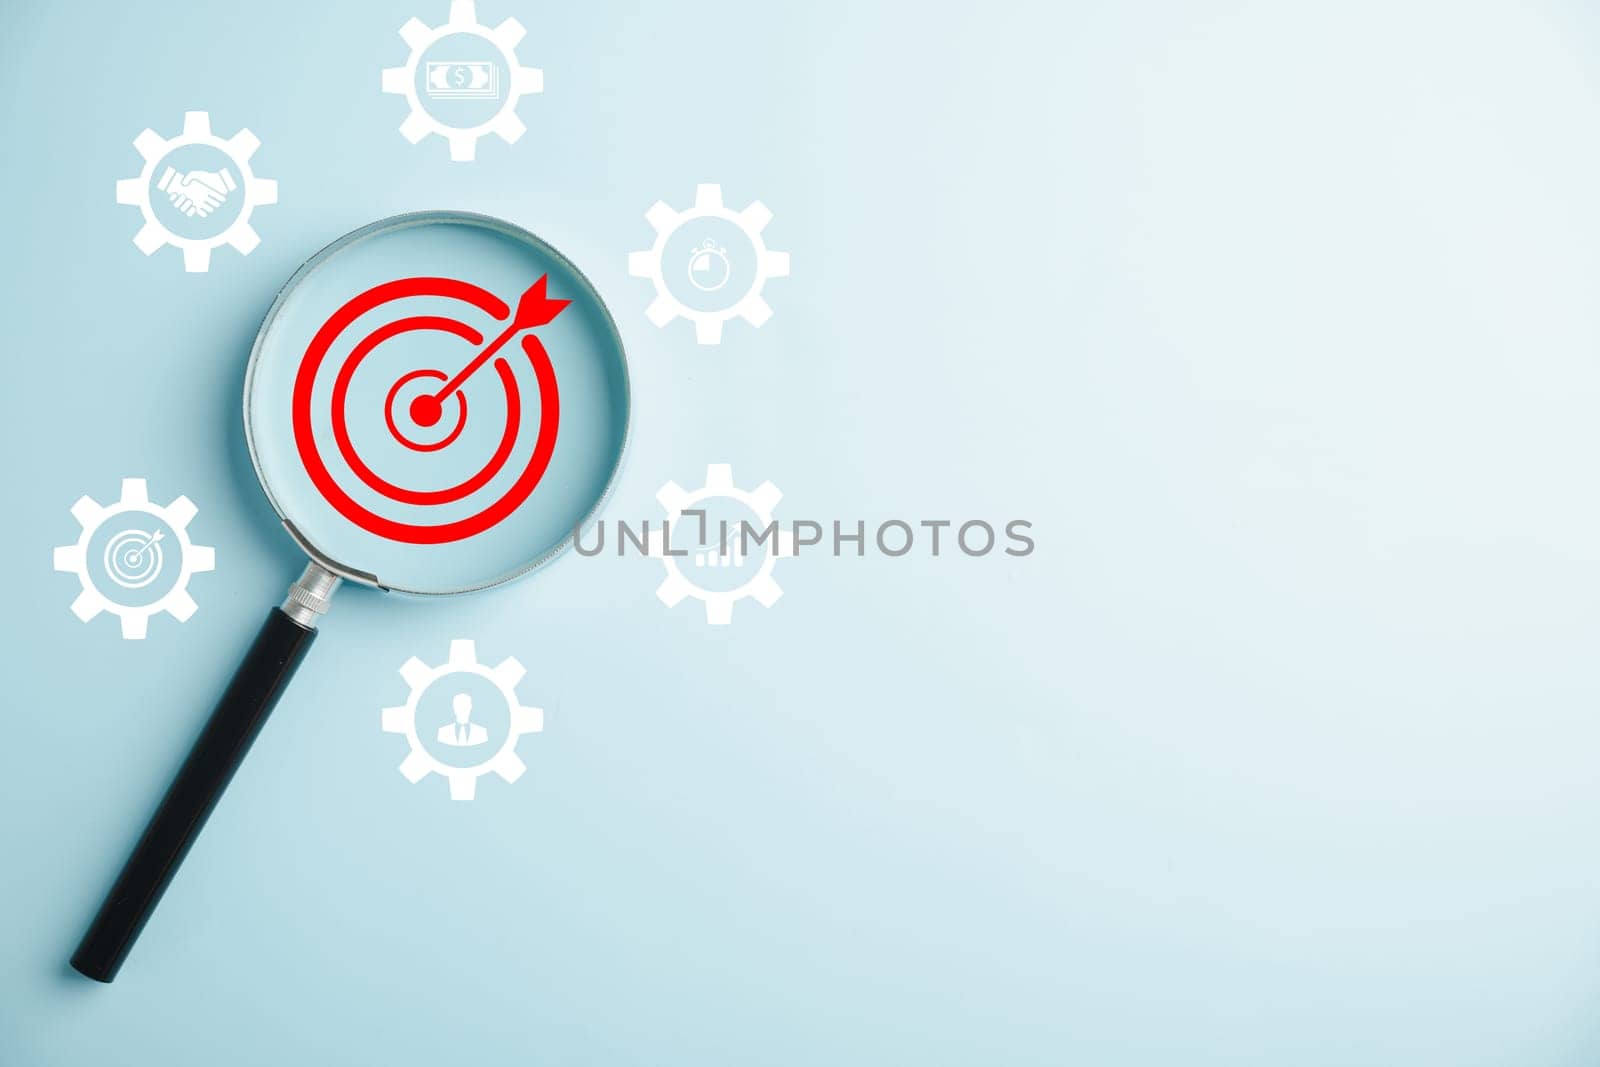 Magnifier to analyze a target icon, offering objective insights and guiding management. It represents the concept of gear planning, development, and propelling business forward.